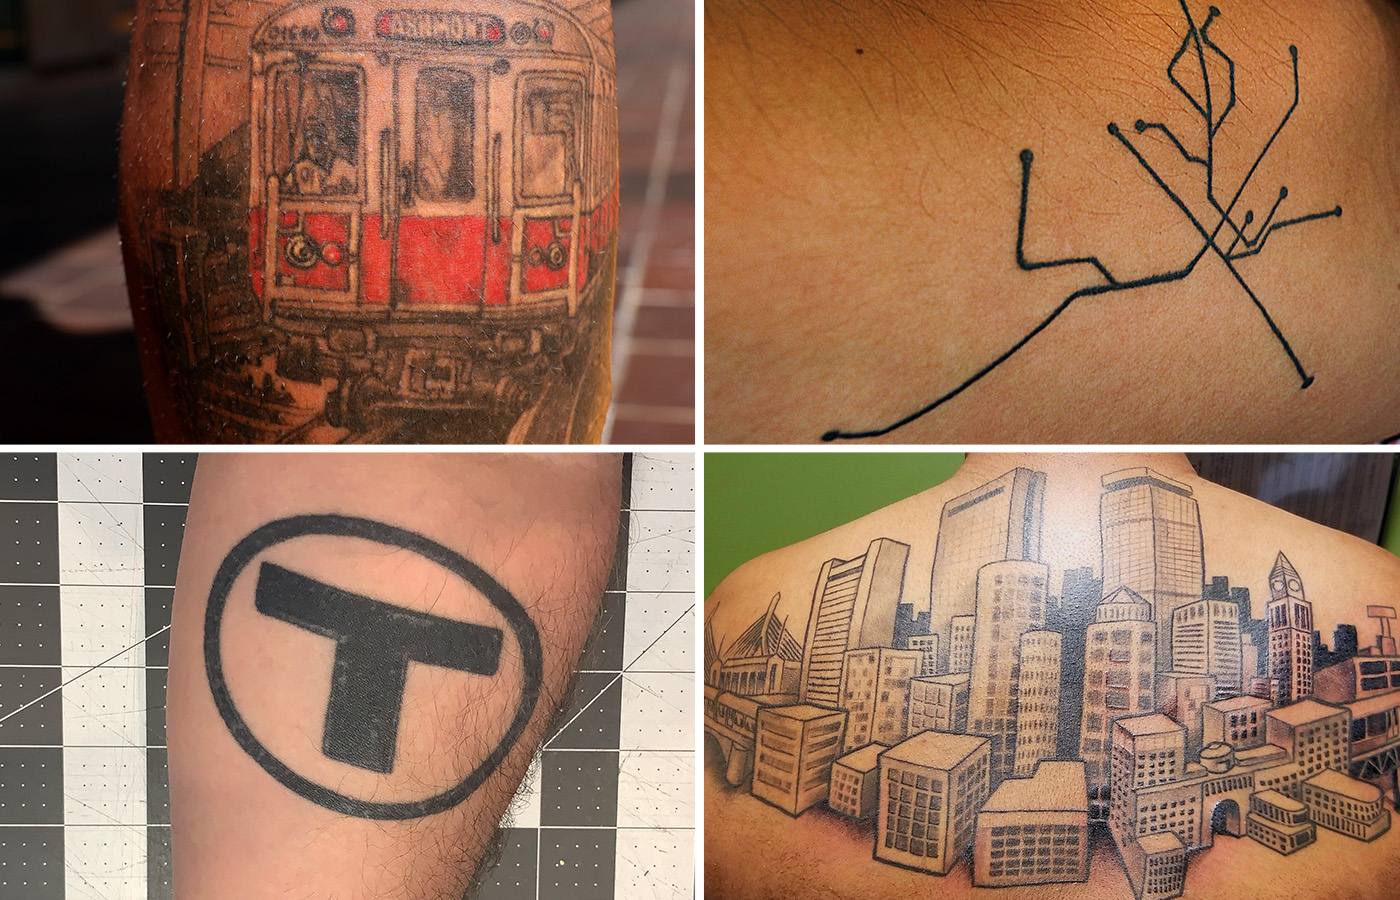 Subway Offers Free Sandwiches for Life If a Superfan Gets a Footlong Tattoo